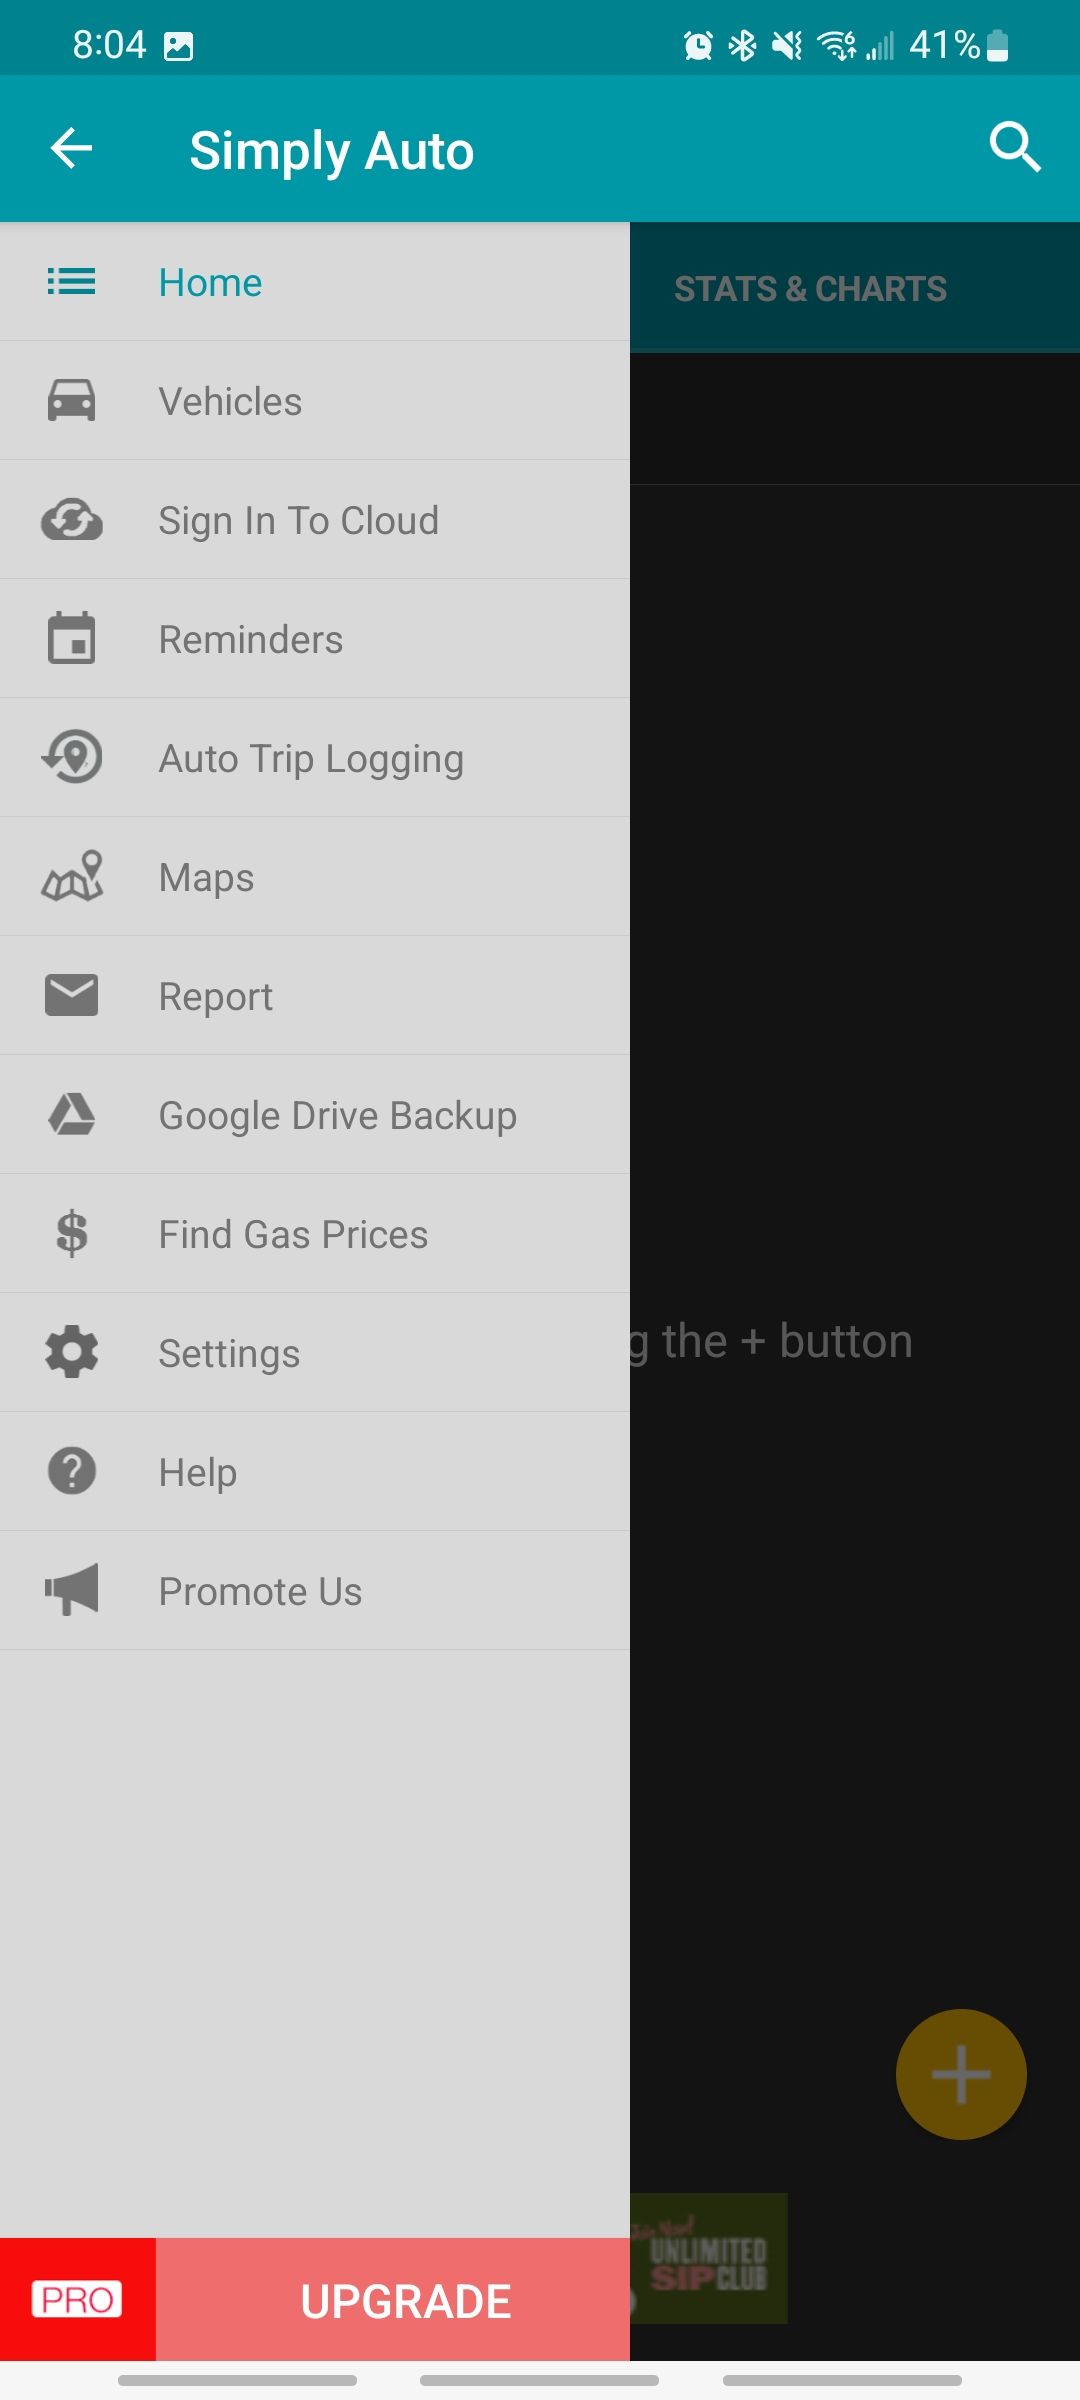 simply auto side menu features